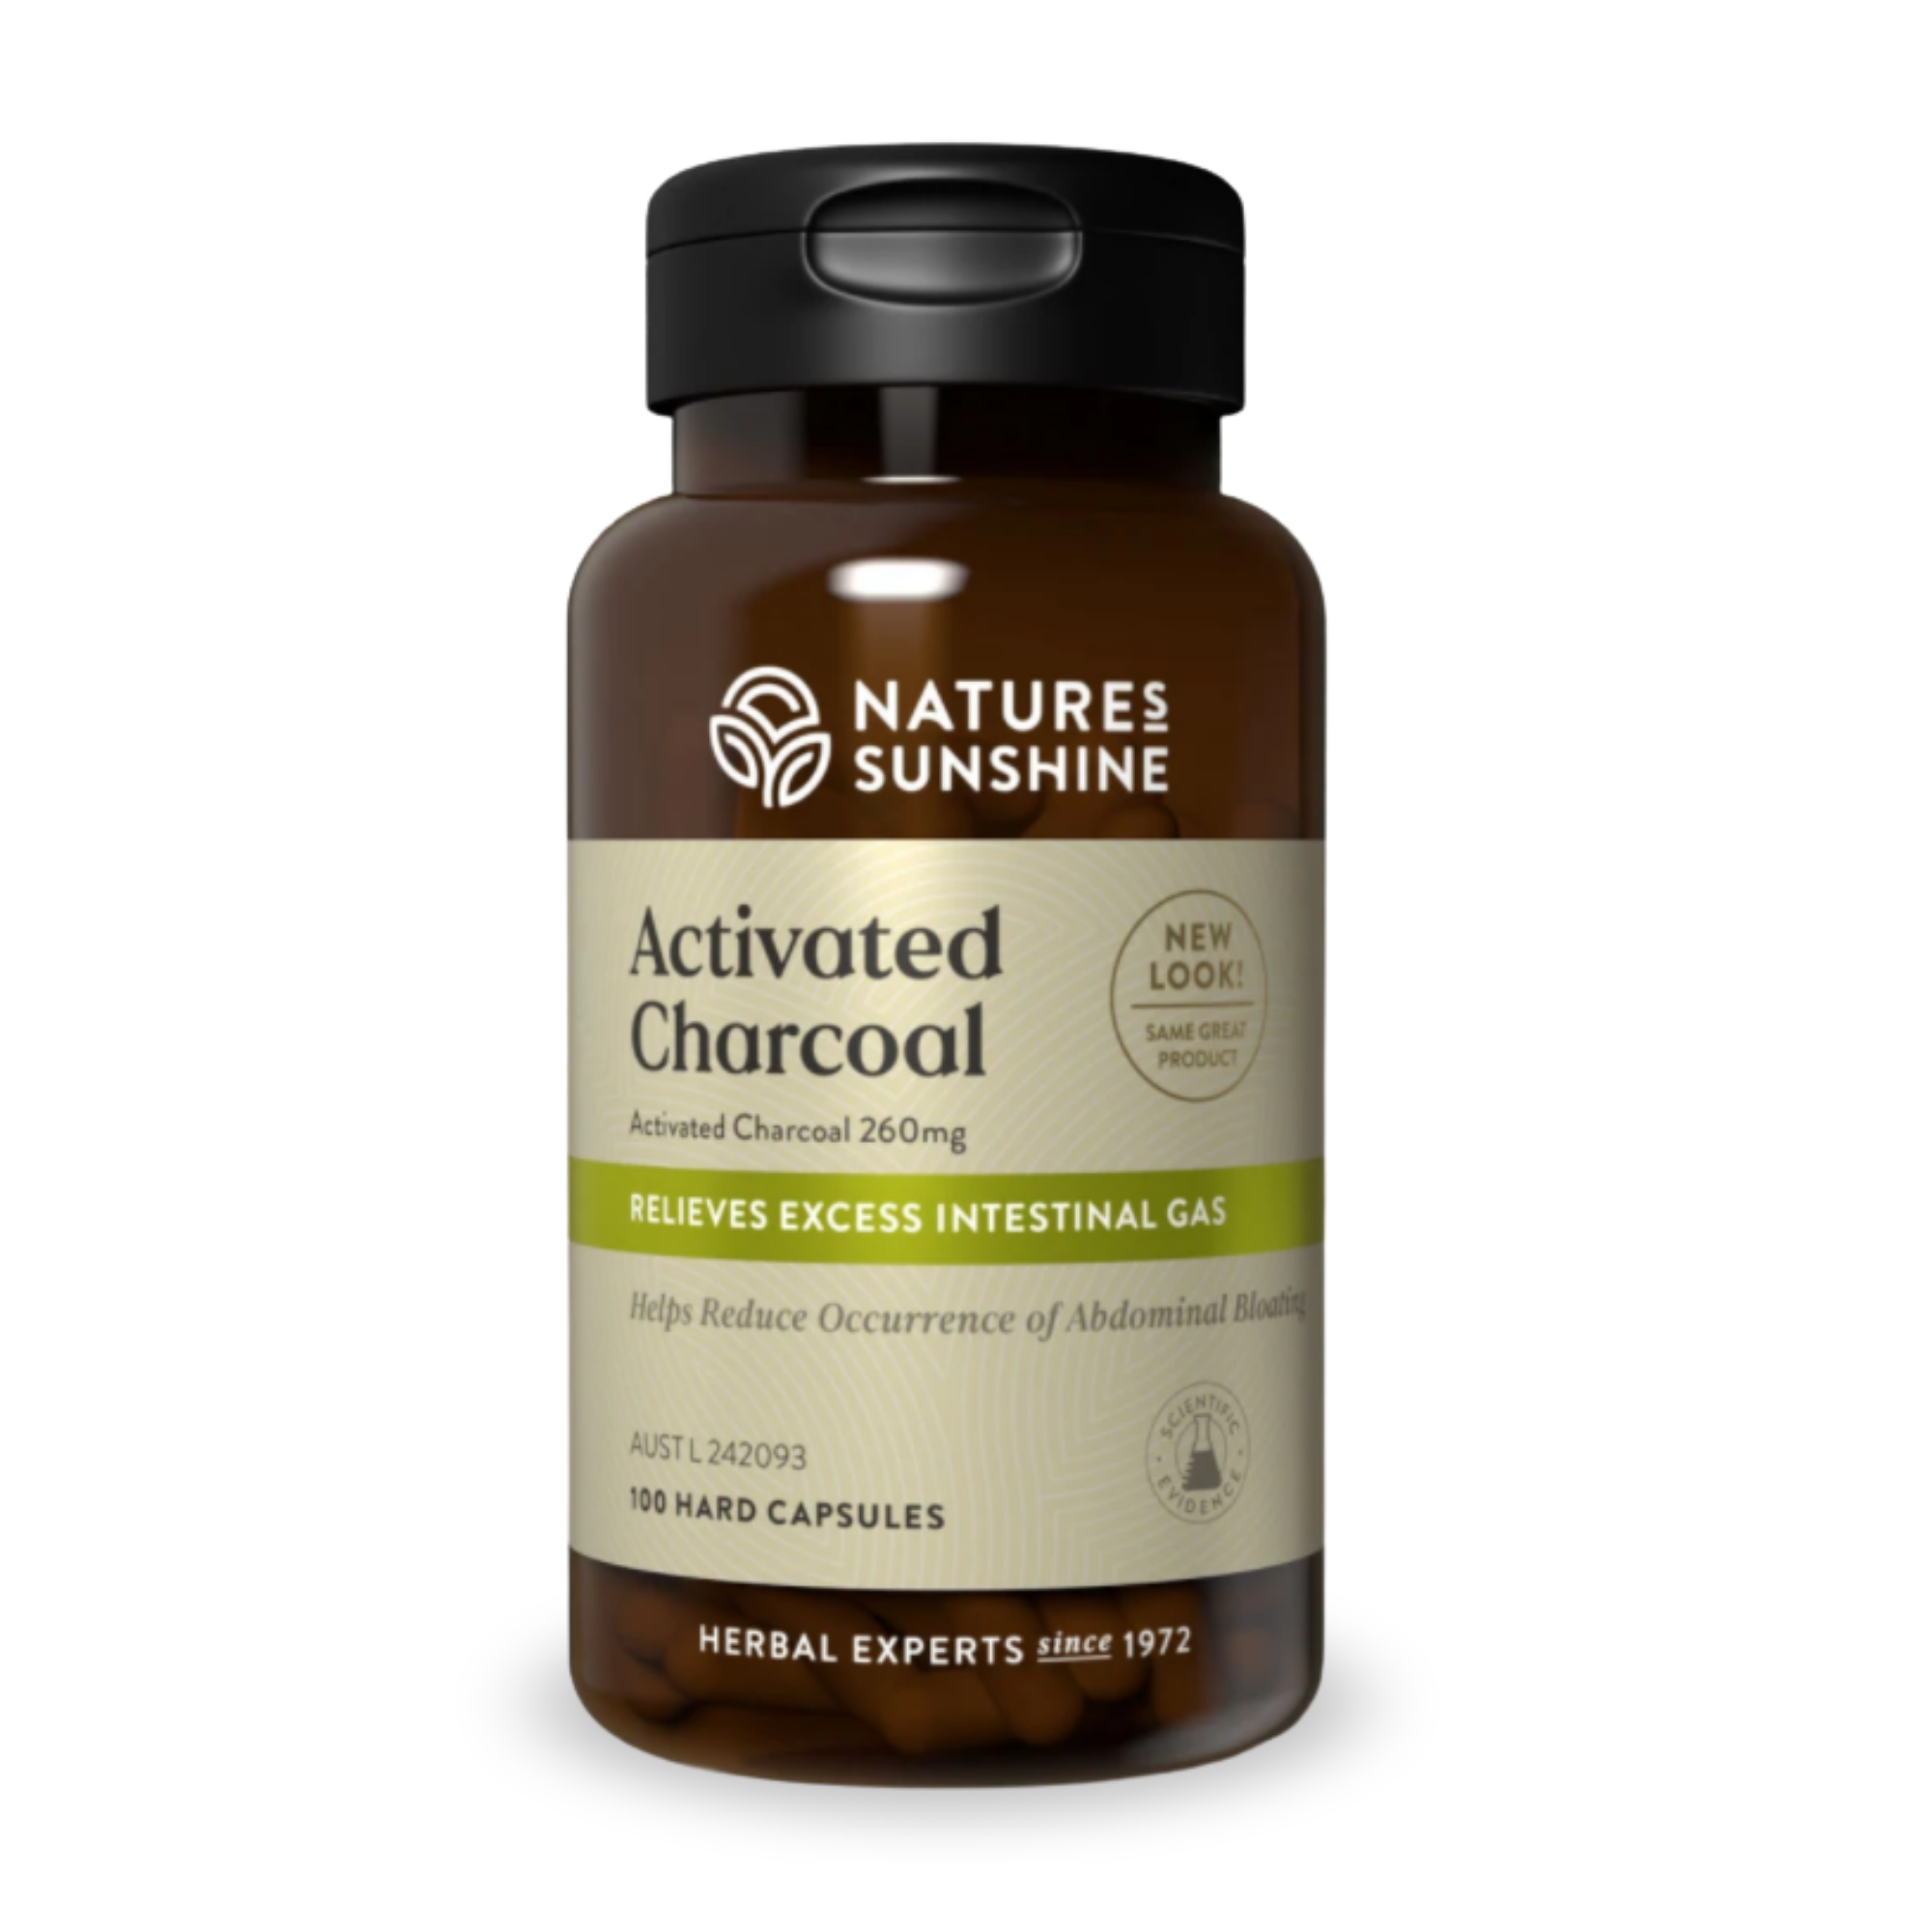 Nature's Sunshine Activated Charcoal 100 Hard Capsules